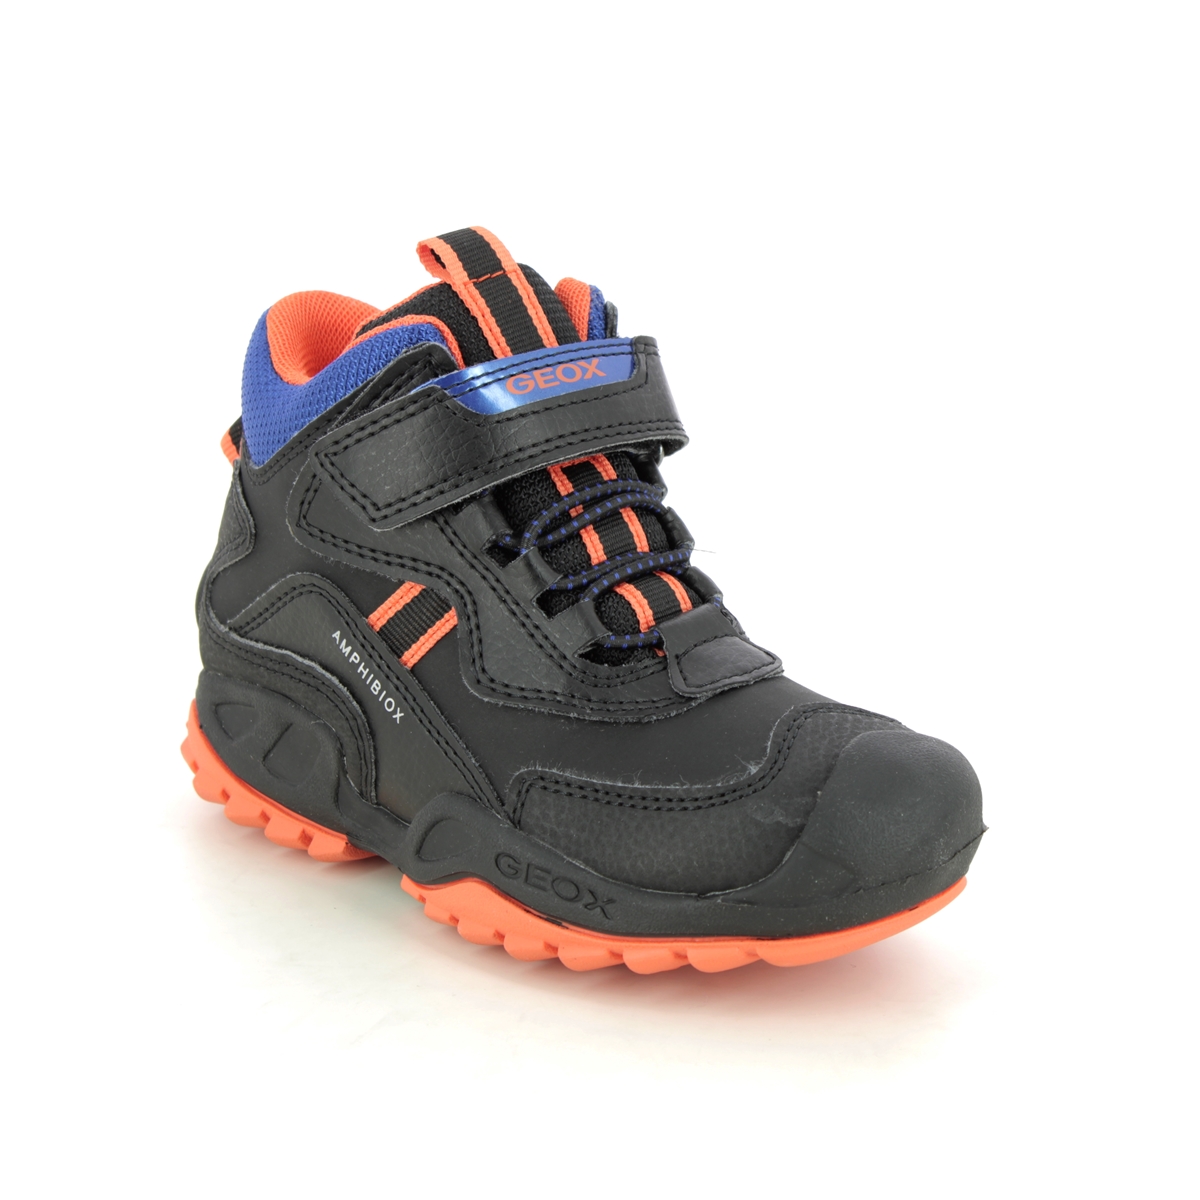 Geox - Savage Boot Tex (Black) J261Wb-C0399 In Size 31 In Plain Black For School For kids